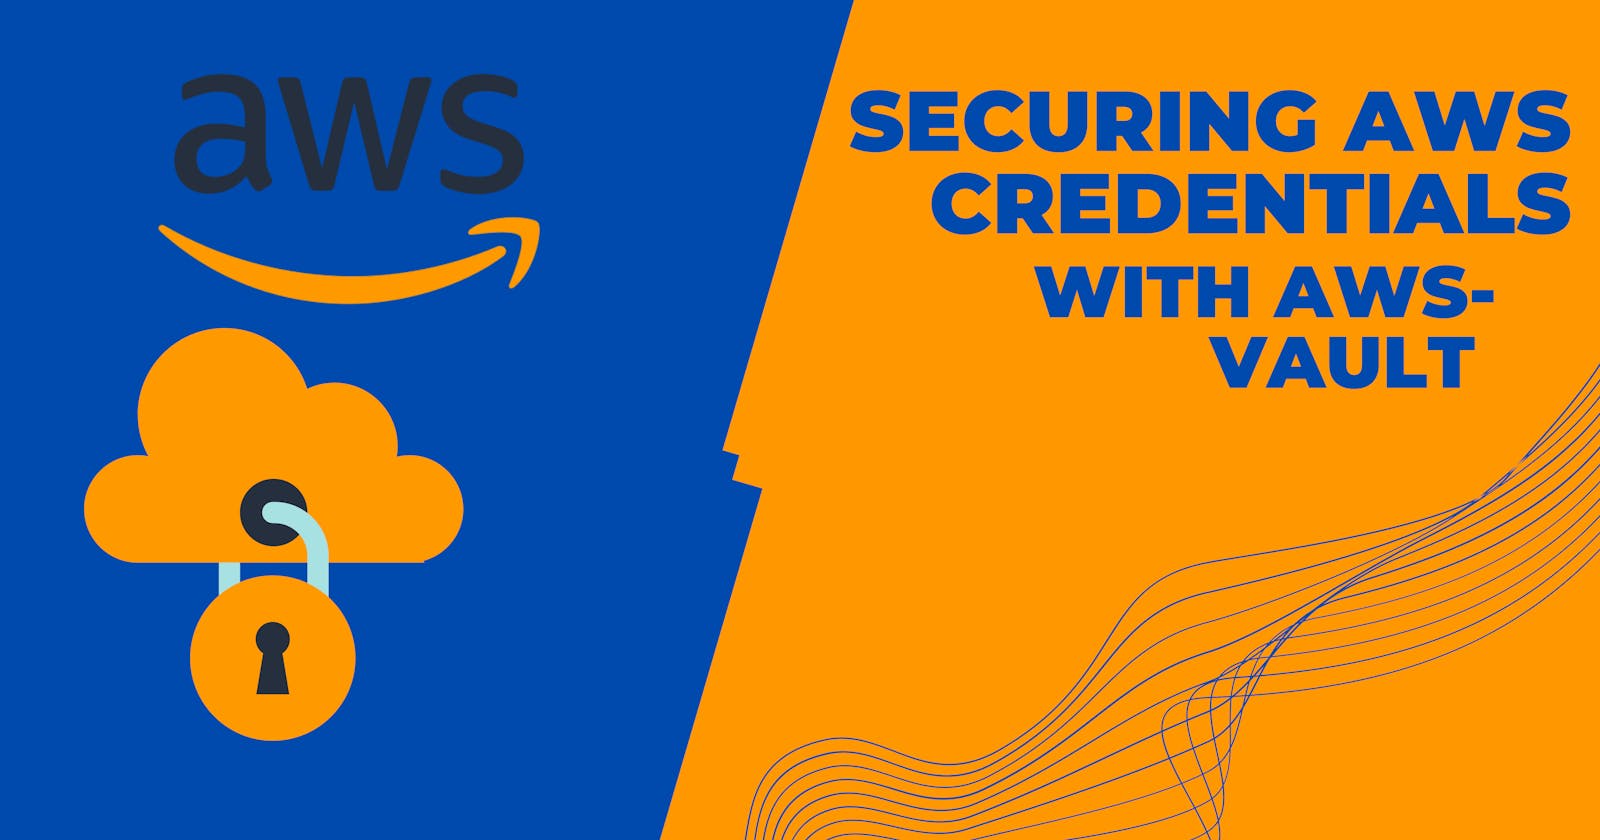 Securing AWS credentials with AWS-Vault